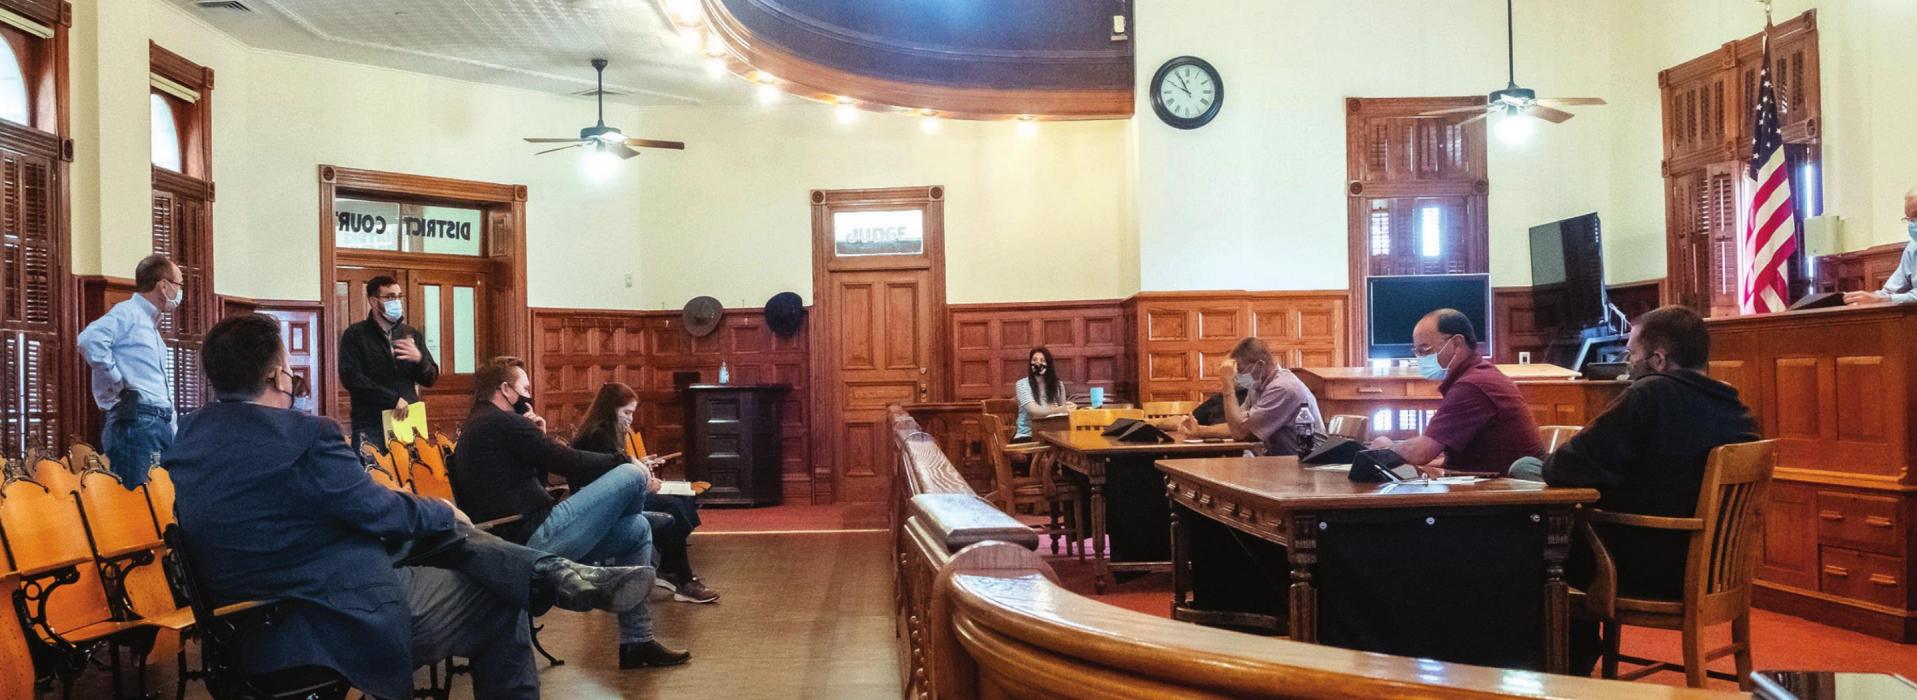 District Judge Jeff Steinhauser (far left) asked Fayette County Commissioners last week to designate a few alternate locations for district court proceedings. Steinhauser said the historic district courtroom, pictured above, cannot accommodate jury trials under social distancing rules issued by the State. Photo by Andy Behlen